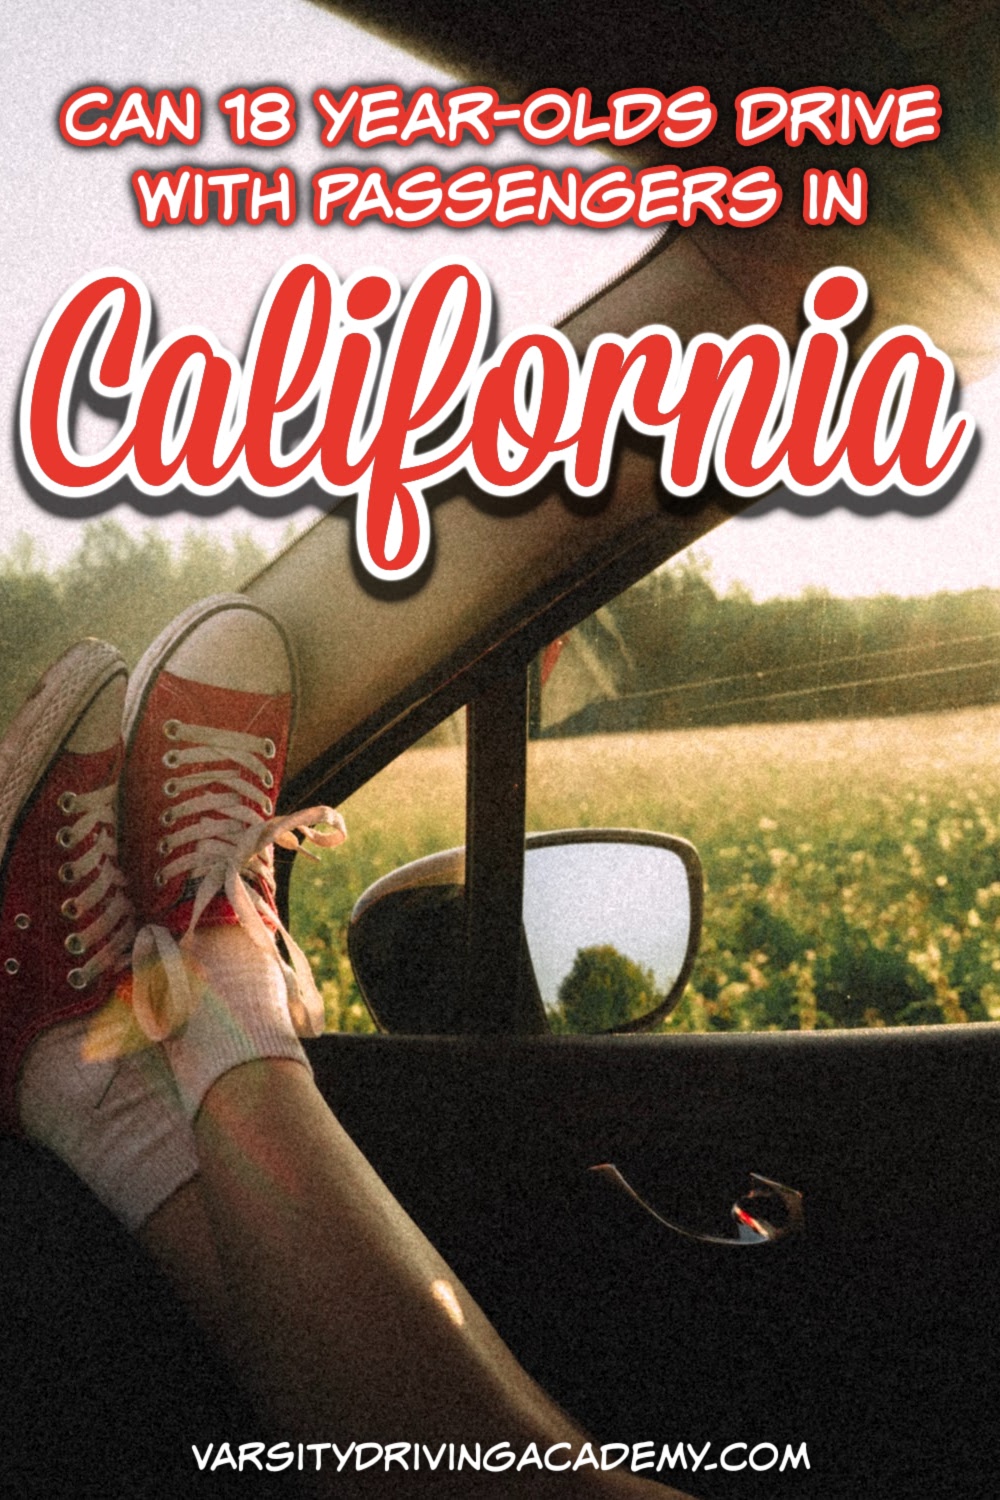 Can an 18 year old drive with passengers in California? Knowing the laws is a big part of becoming a safe driver.